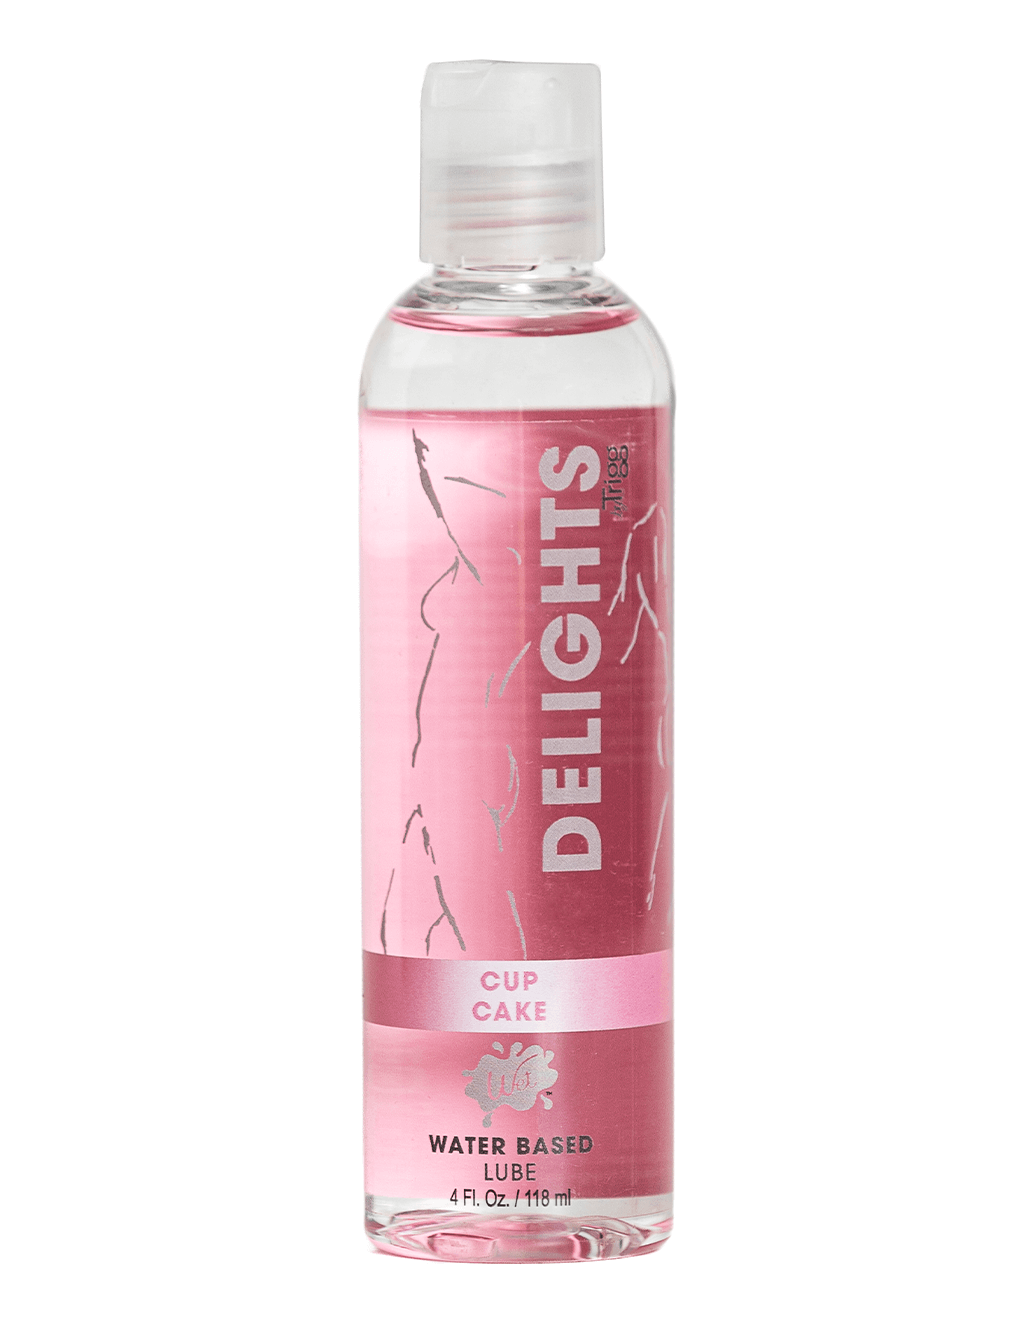 Wet Delights Lubricant Cup Cake Bottle Front